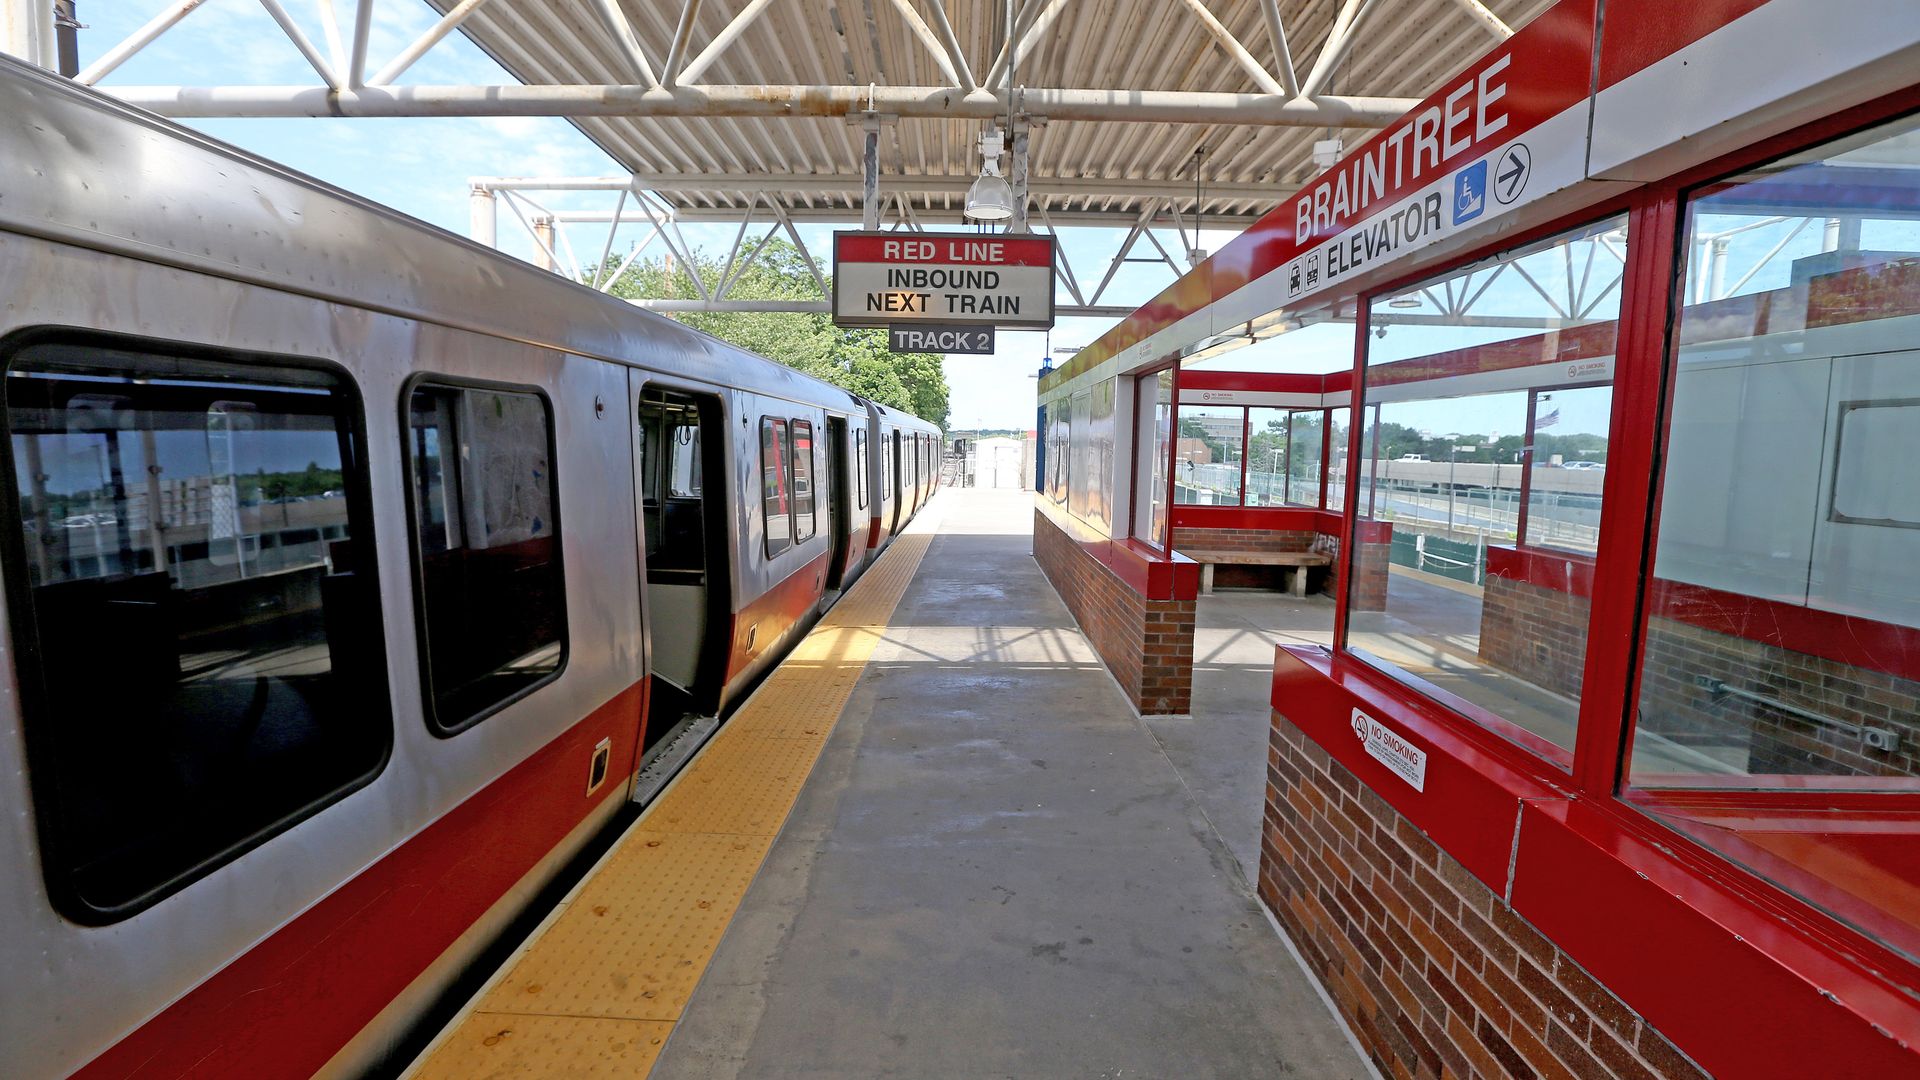 A Red Line train stops at the Braintree station, and the platform is empty.